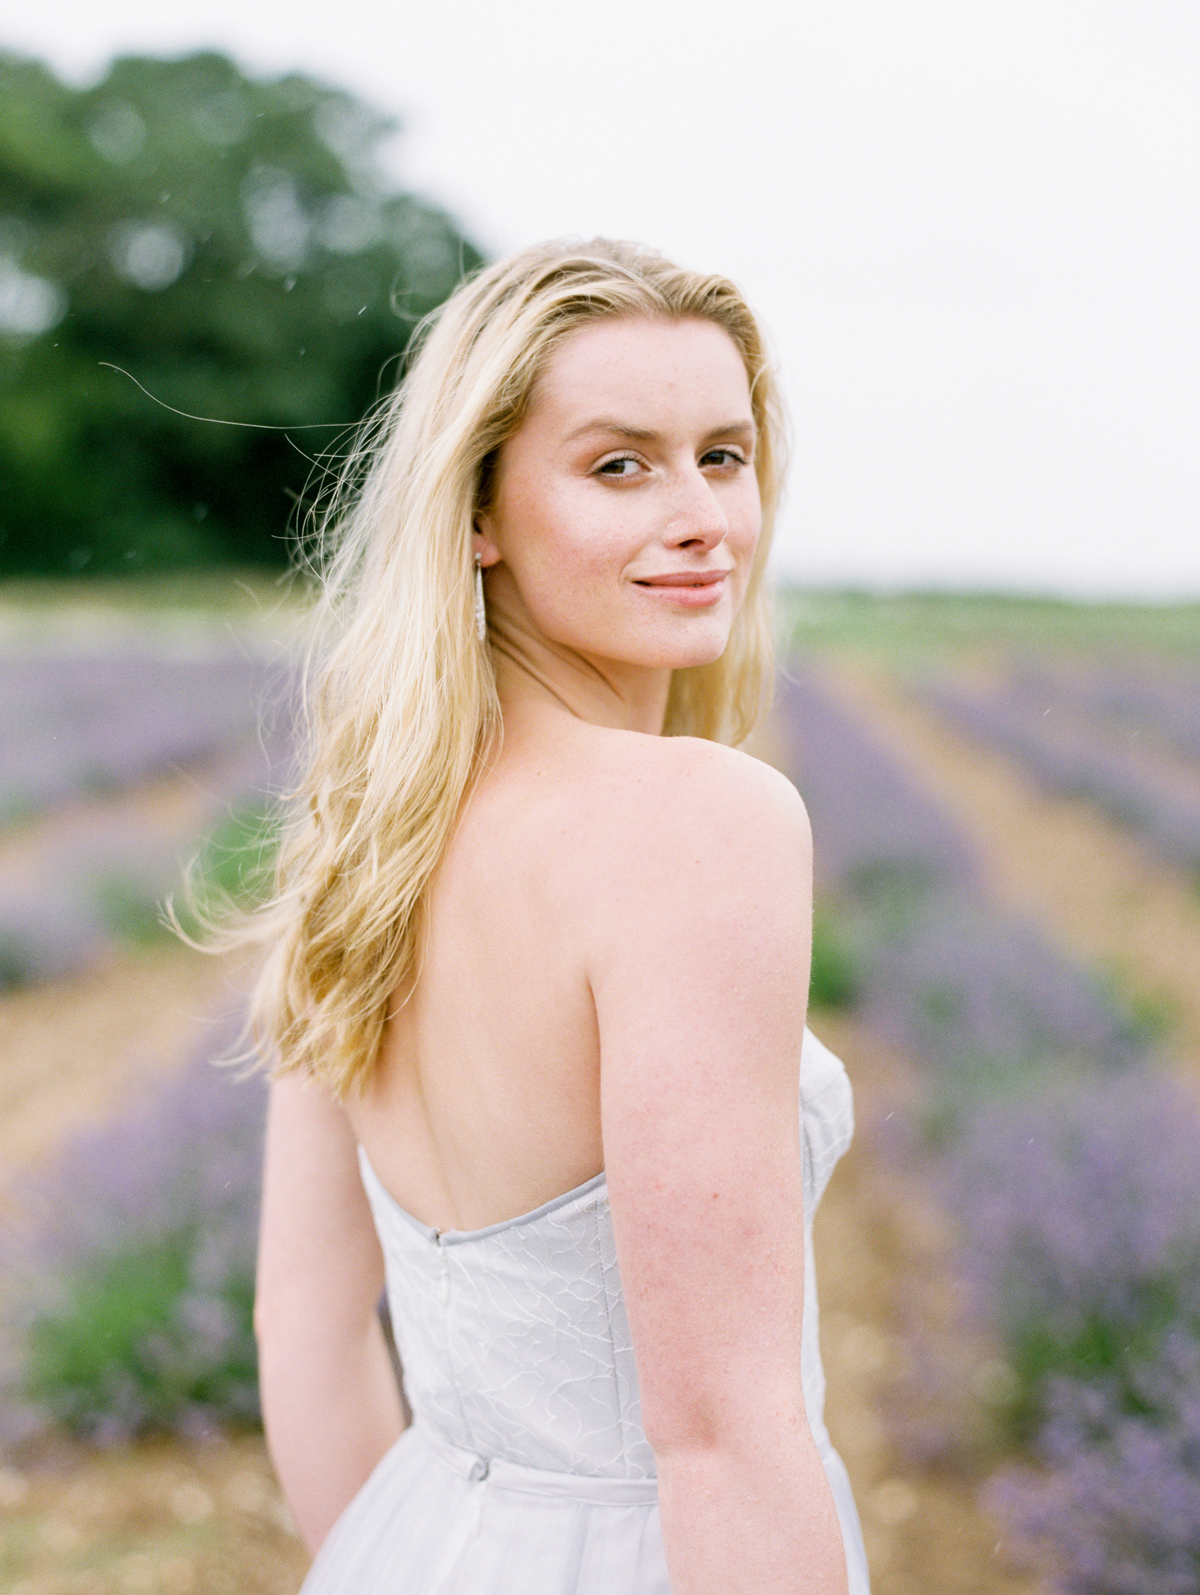 Elegant Naomi Neoh gown in a lavender field setting